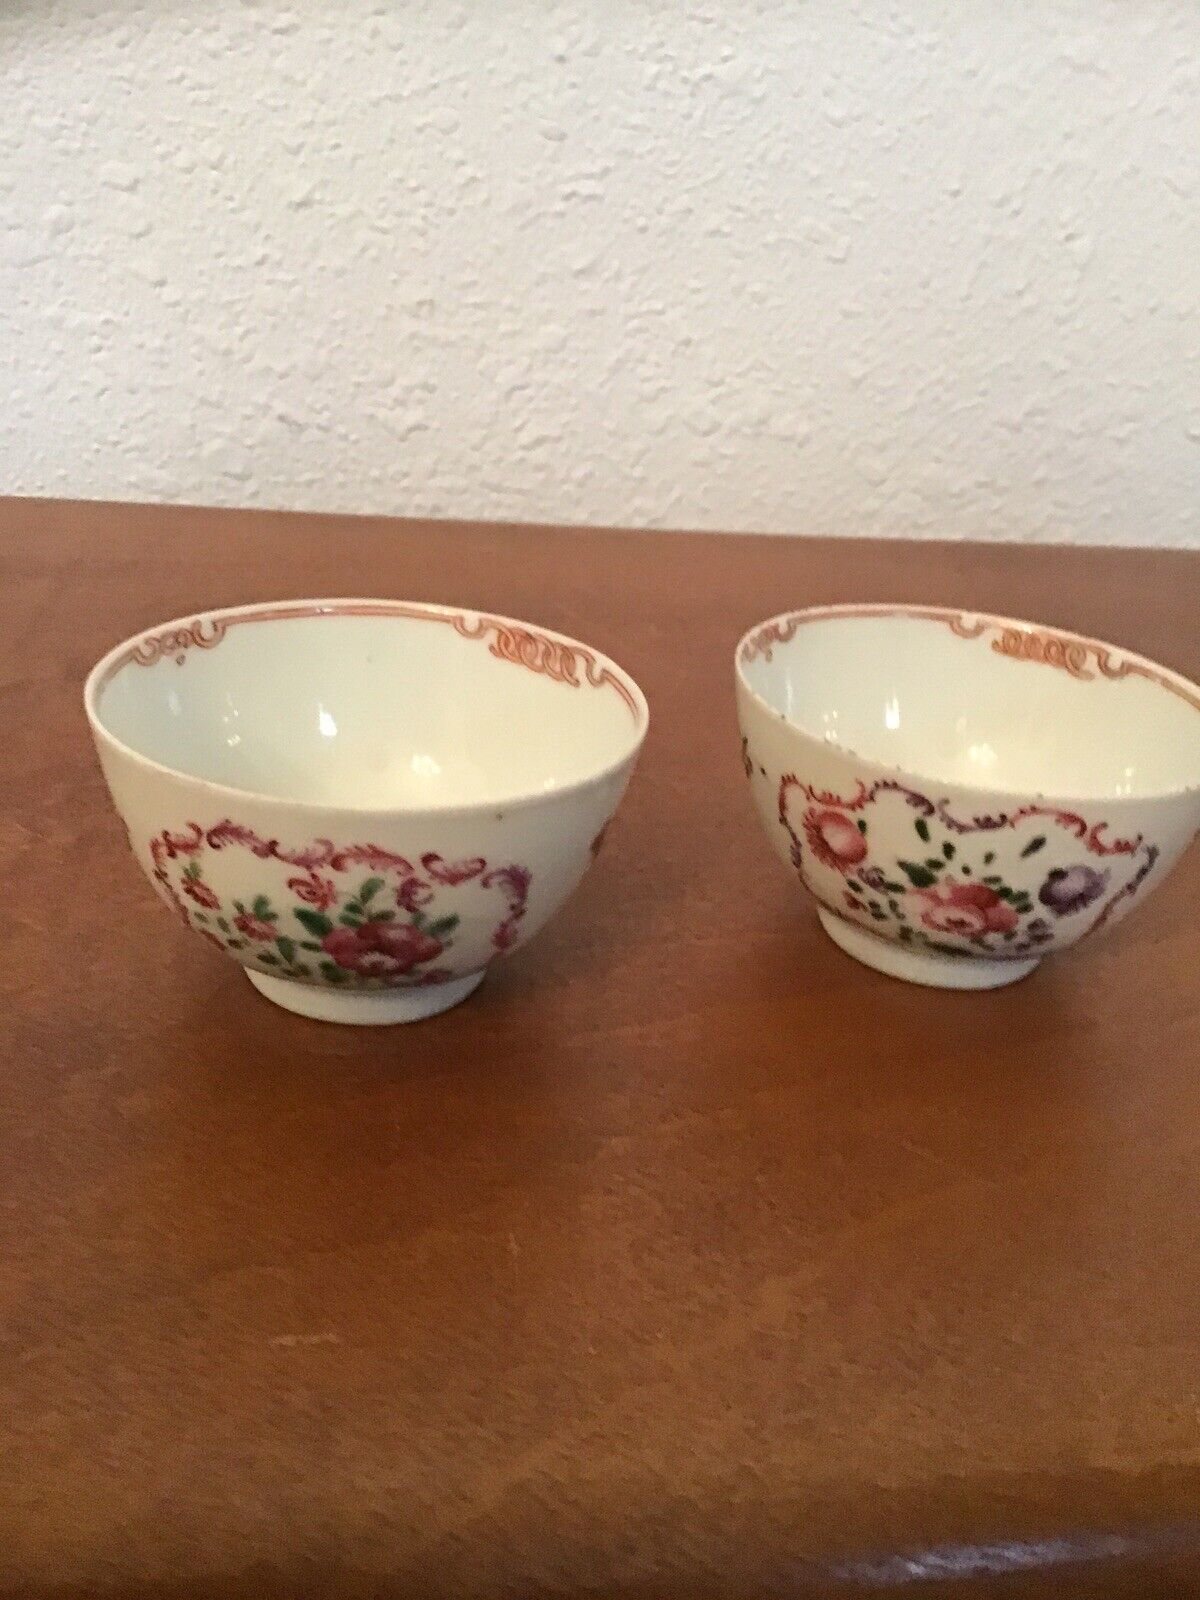 2 Antique Cups Floral Decorations Early 1800’s Chinese Export? New Hall?